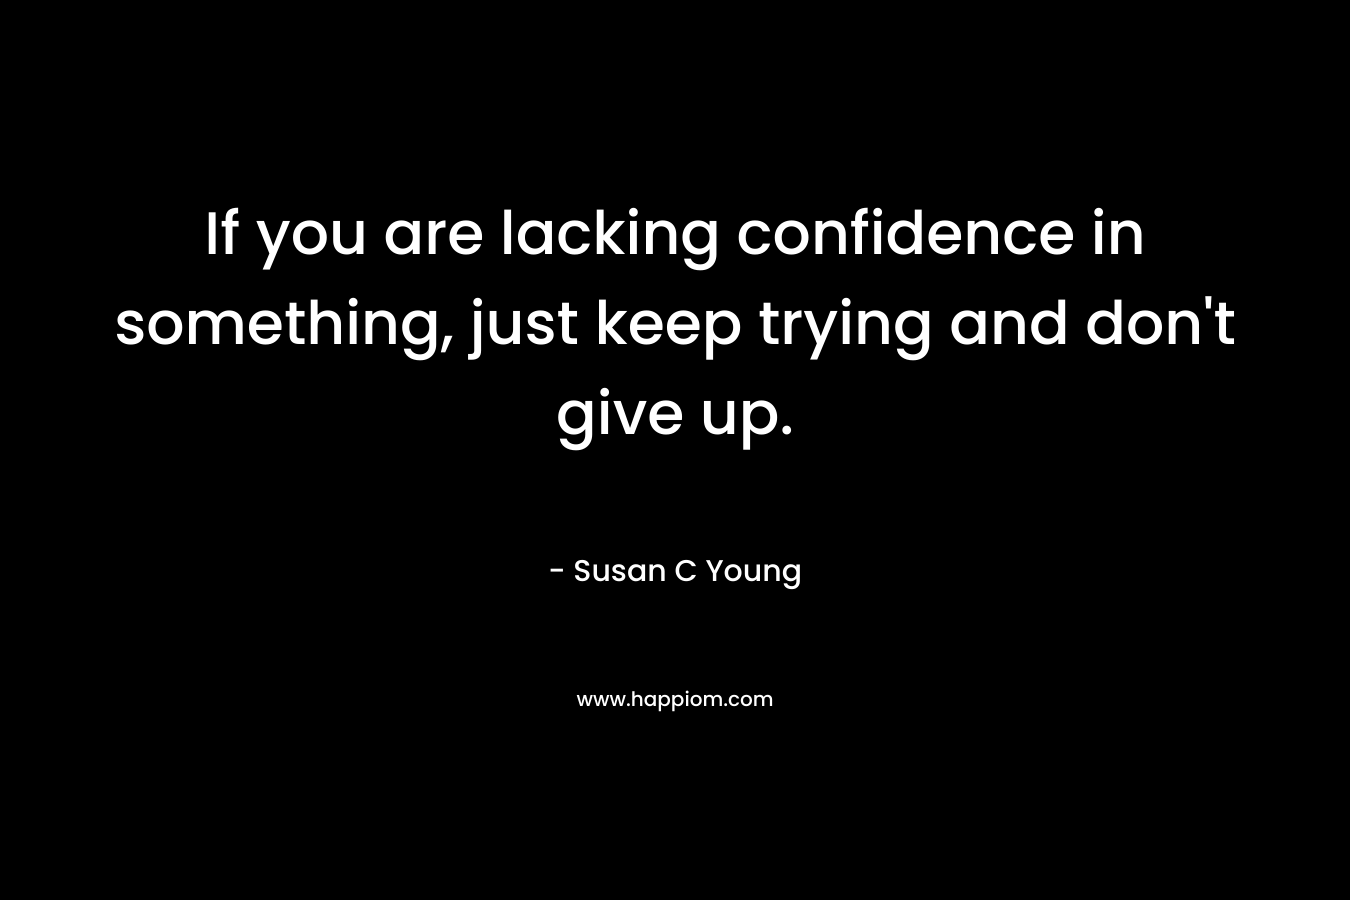 If you are lacking confidence in something, just keep trying and don't give up.